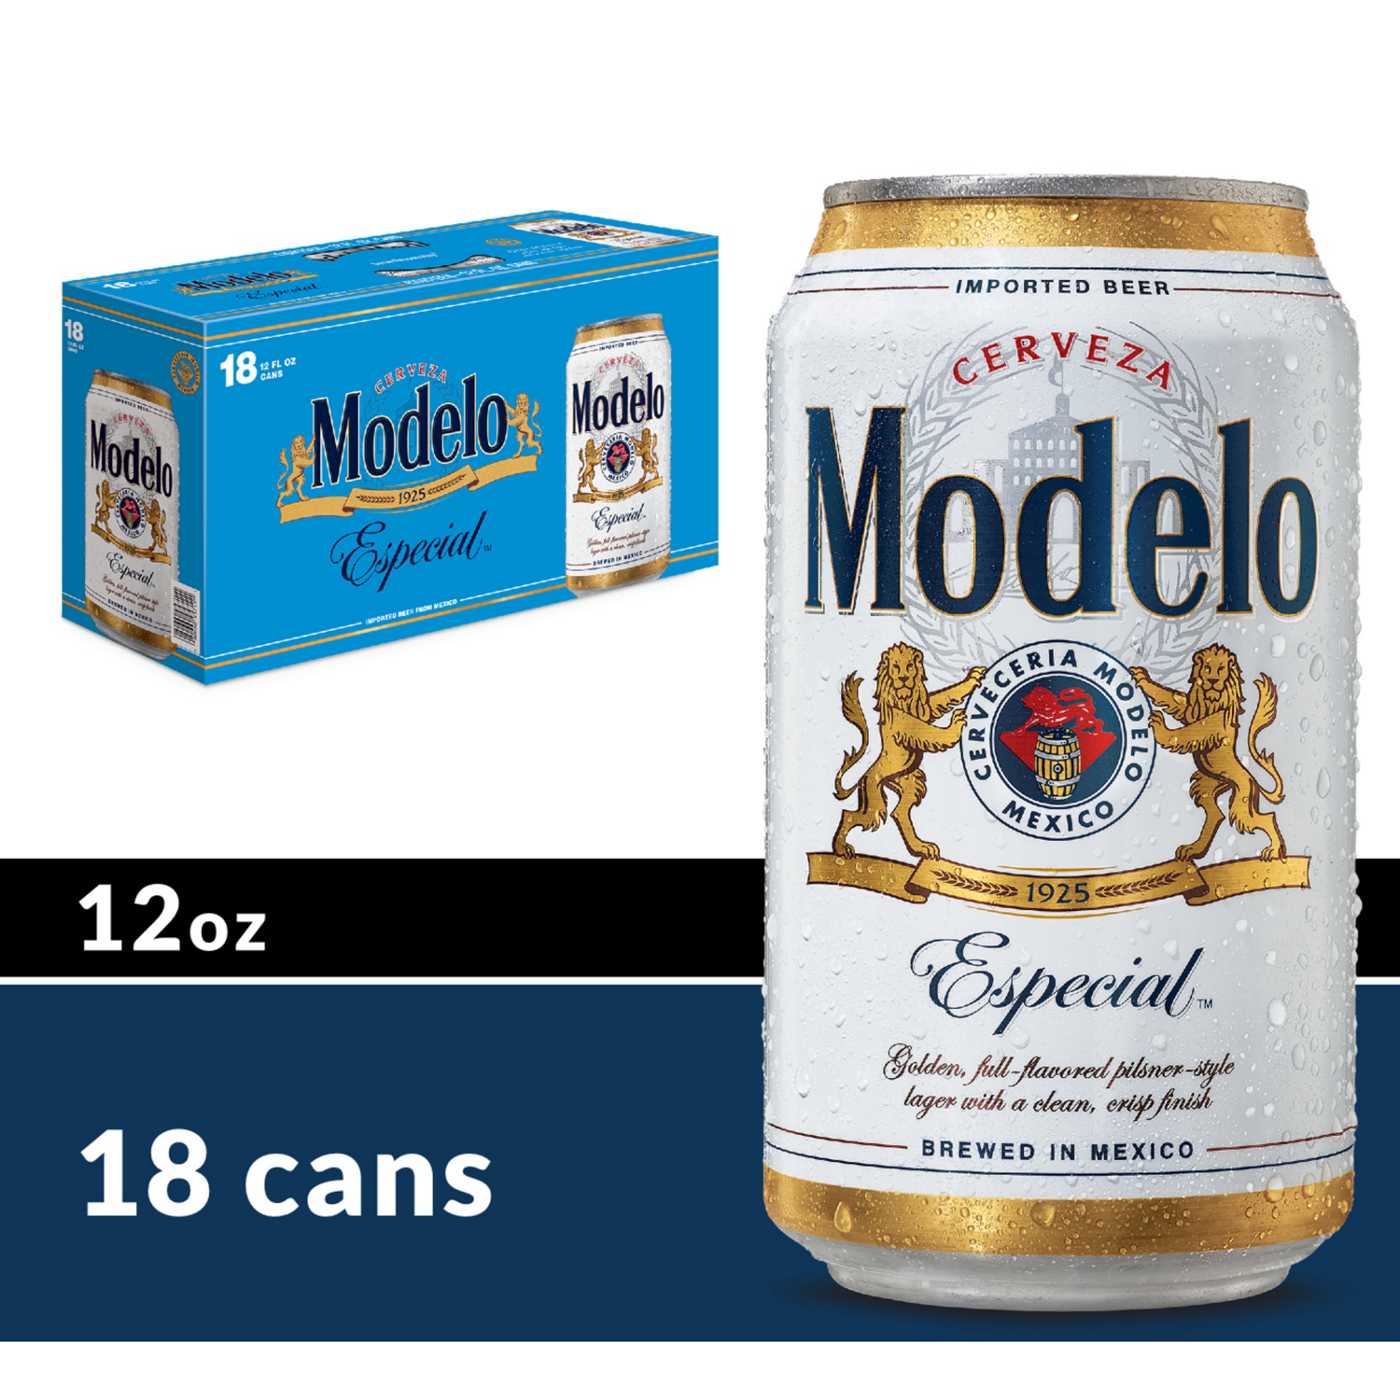 Modelo Especial Mexican Lager Import Beer 12 oz Cans, 18 pk; image 4 of 10